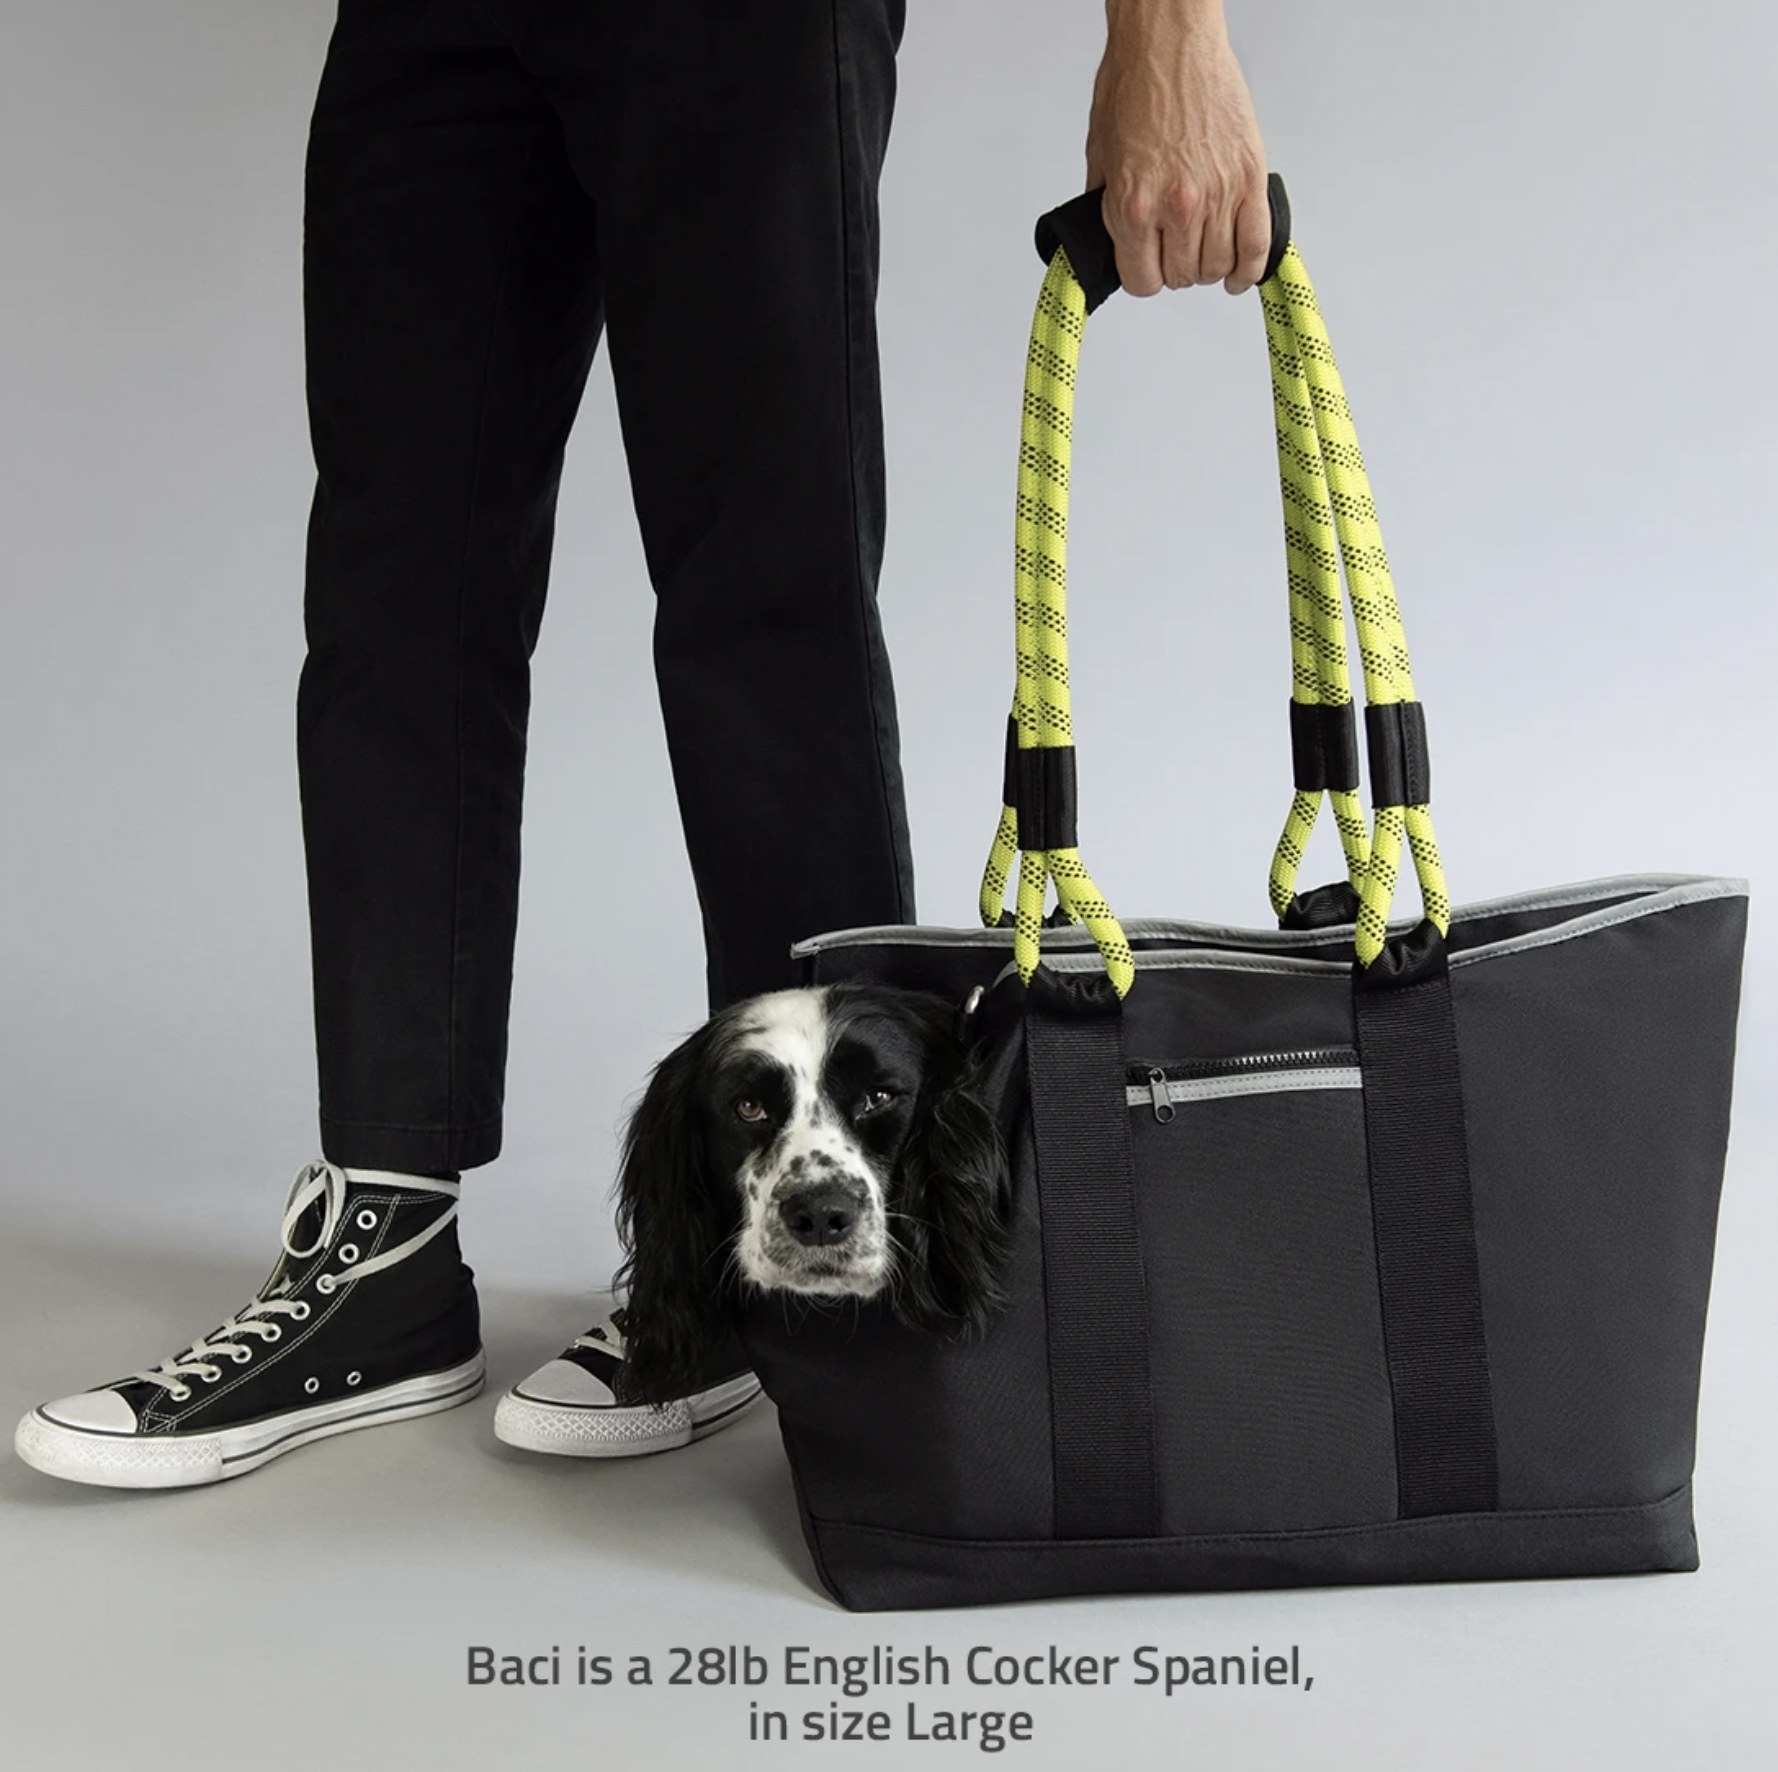 The Black and Yellow Roverlund Dog Tote